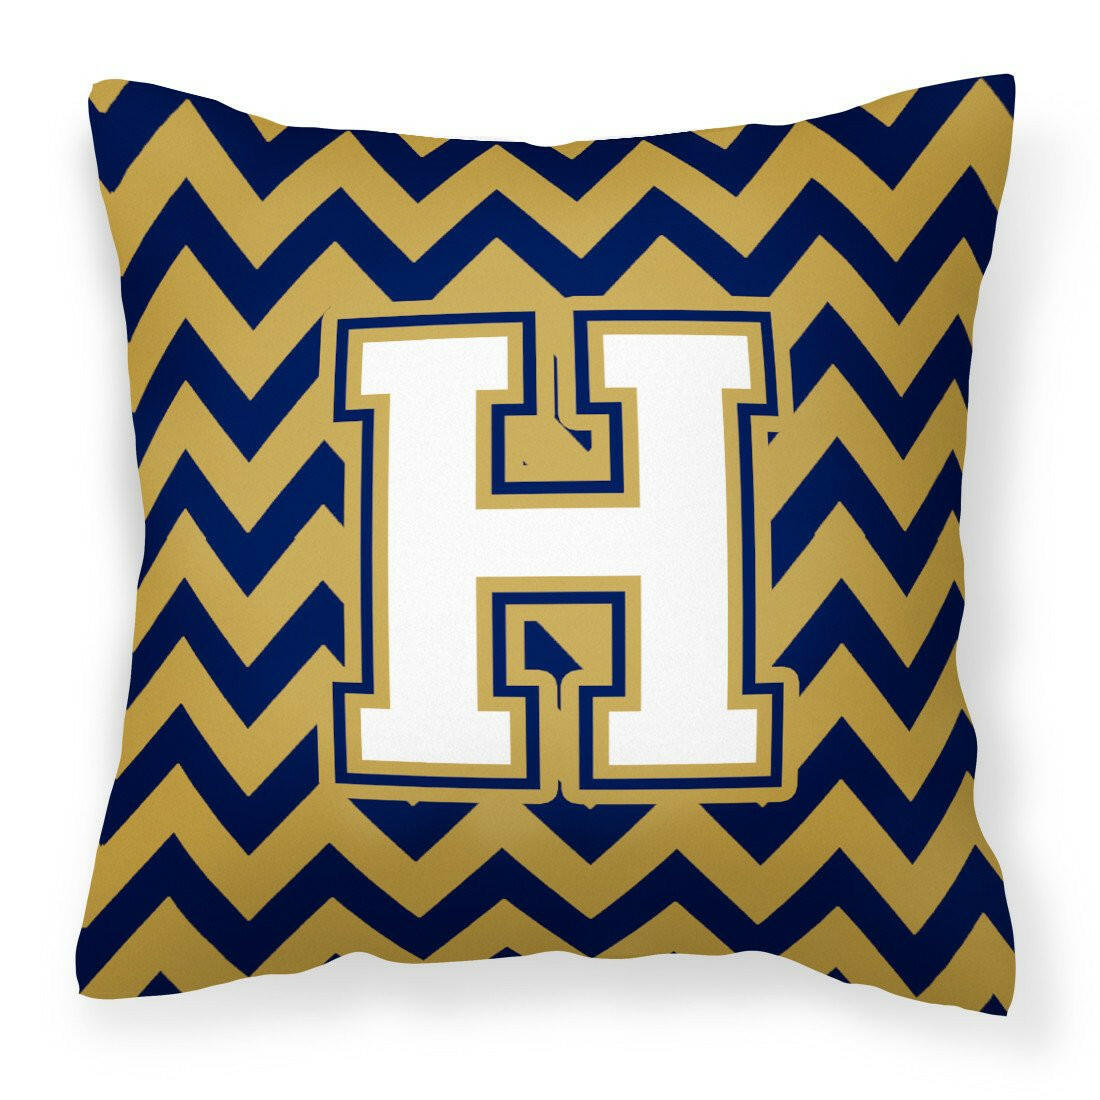 Letter H Chevron Navy Blue and Gold Fabric Decorative Pillow CJ1057-HPW1414 by Caroline's Treasures